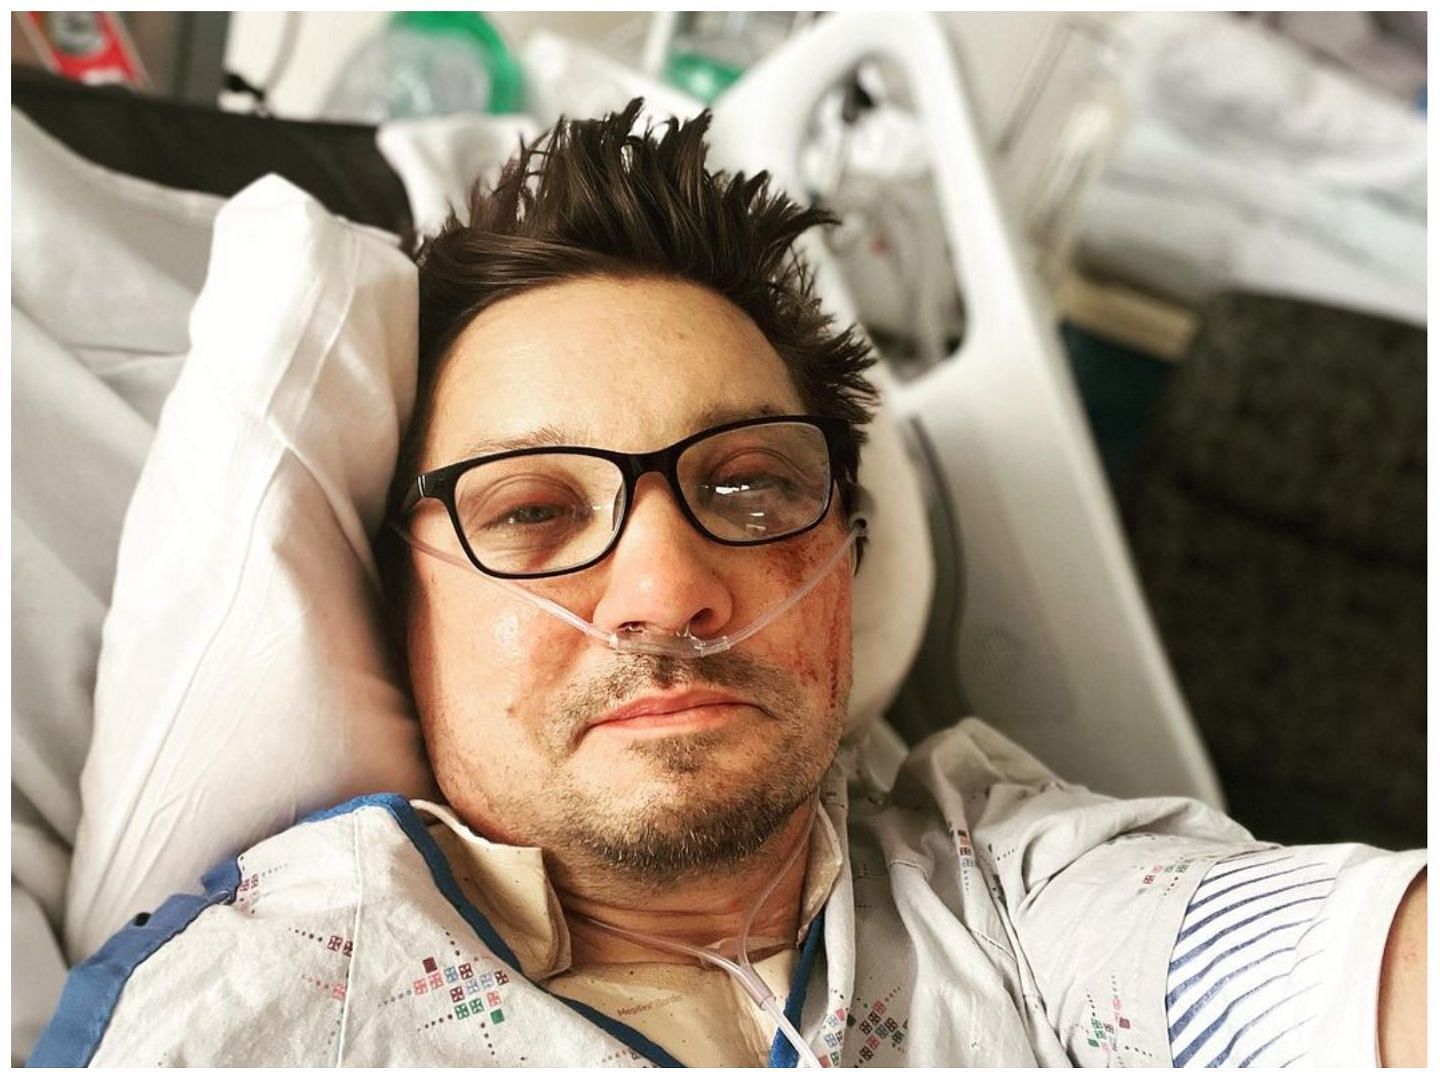 Jeremy Renner, star of the Avengers and The Hurt Locker, is in intensive care after an accident involving a snow plow. (Image via IG @jeremyrenner)